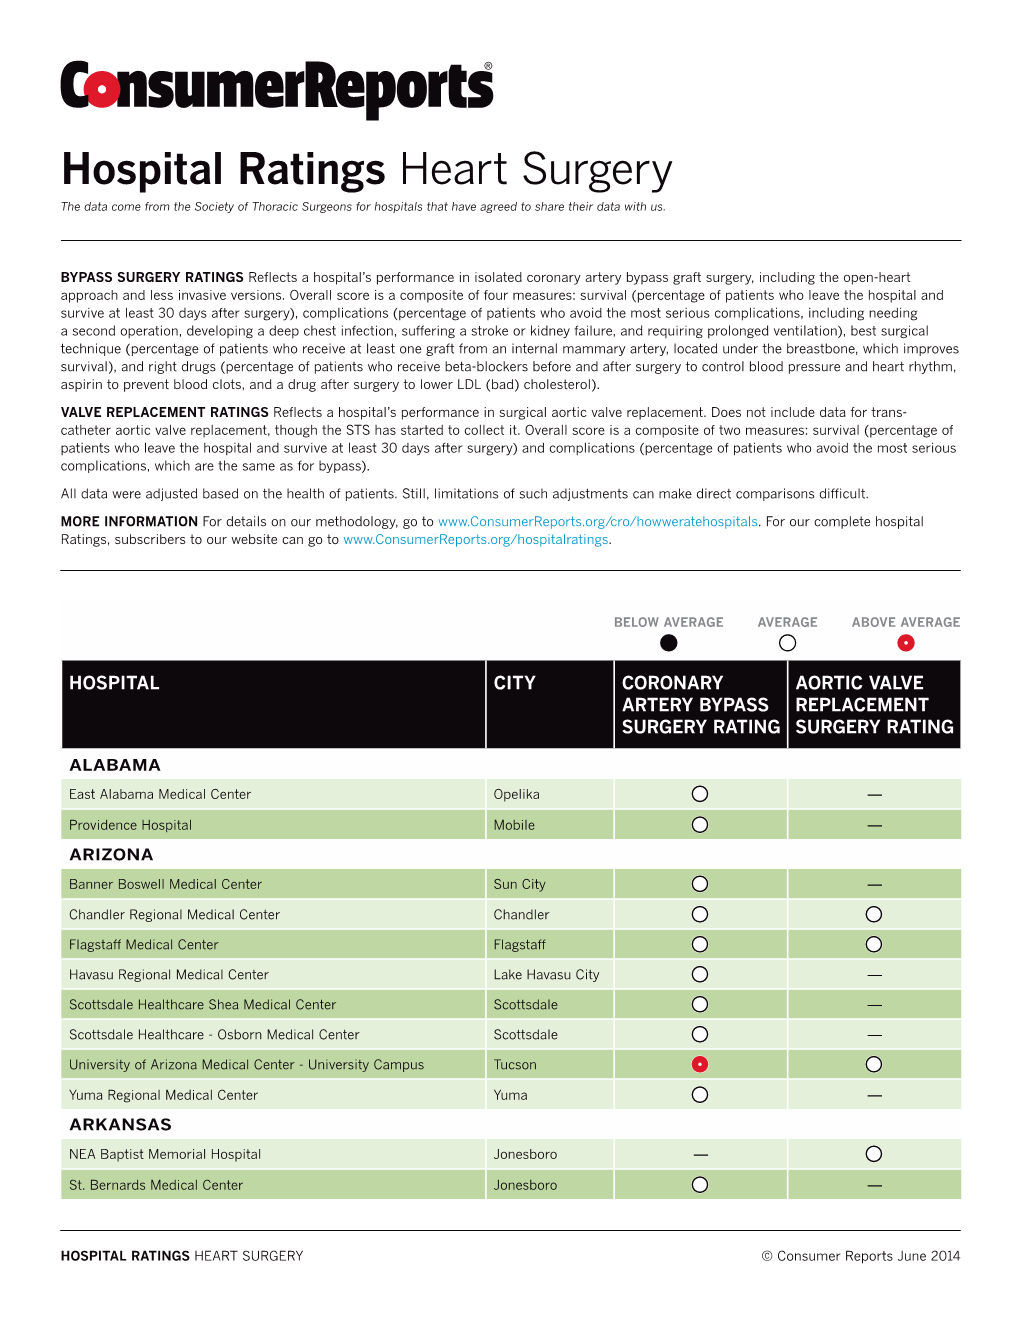 Hospital Ratings Heart Surgery the Data Come from the Society of Thoracic Surgeons for Hospitals That Have Agreed to Share Their Data with Us